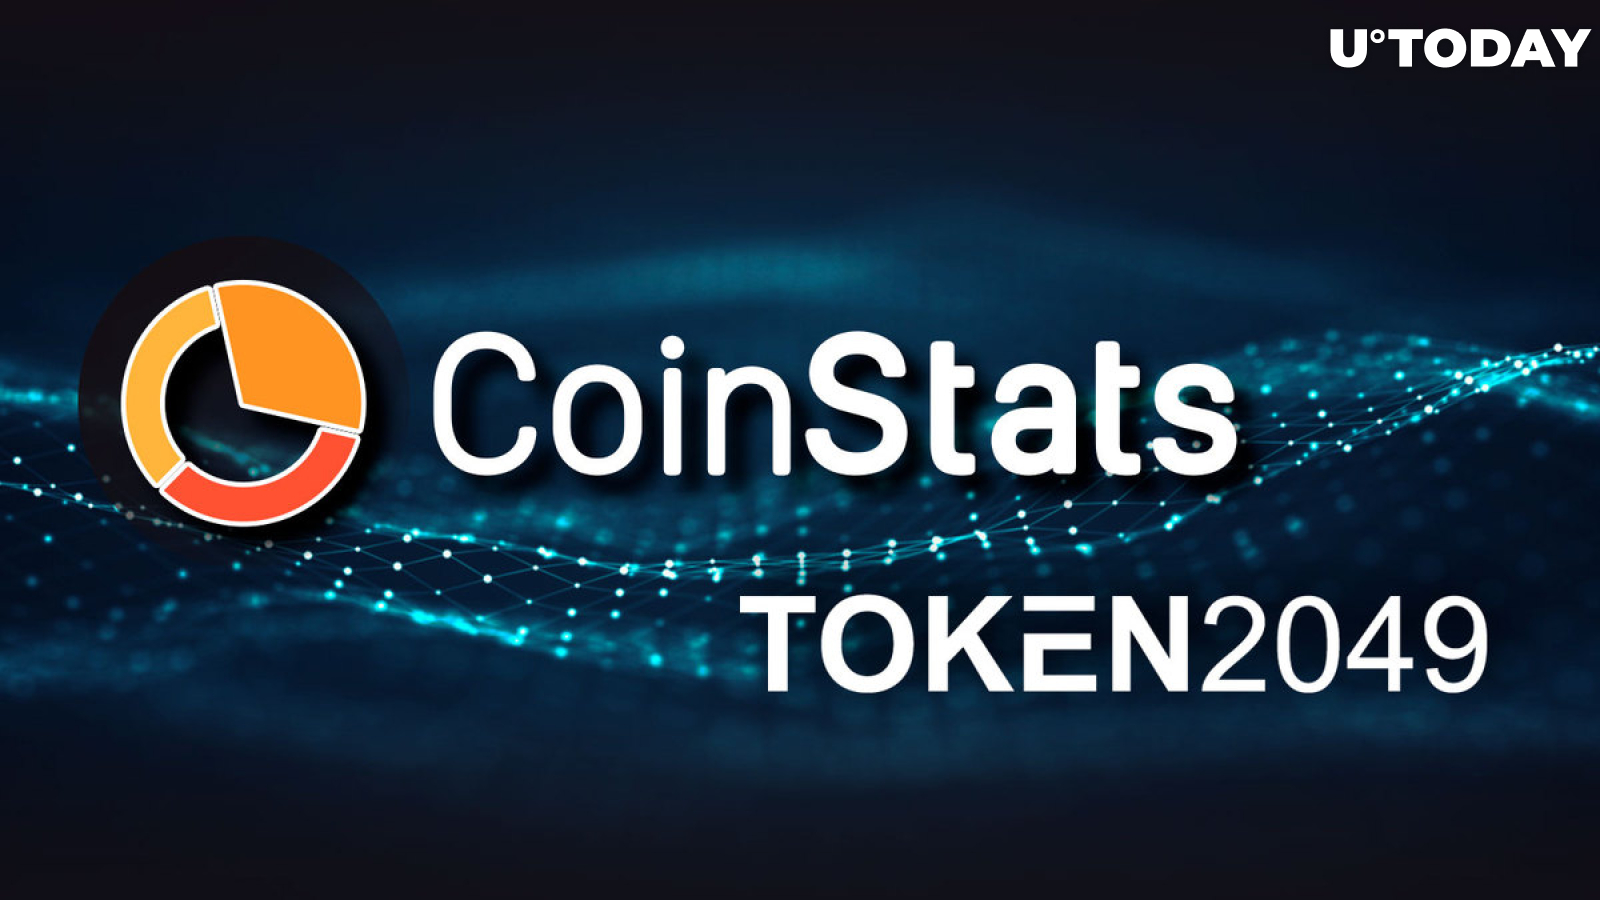 CoinStats Introduces Degen Checkpoint at TOKEN2049: What to See